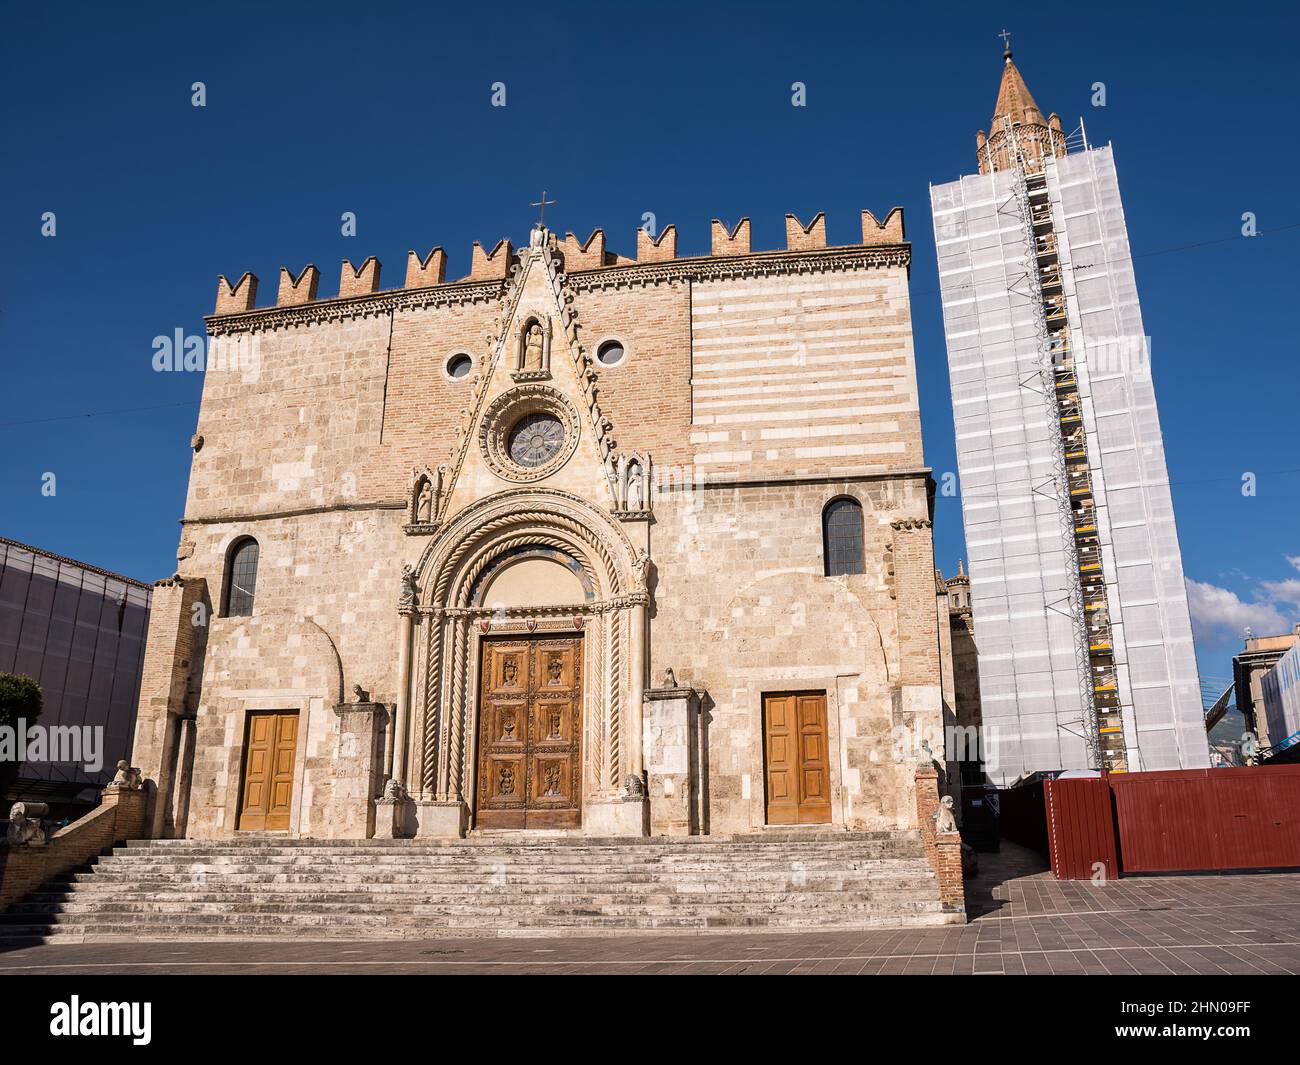 The Facade of the Cathedral of Teramo (Italy) Stock Photo